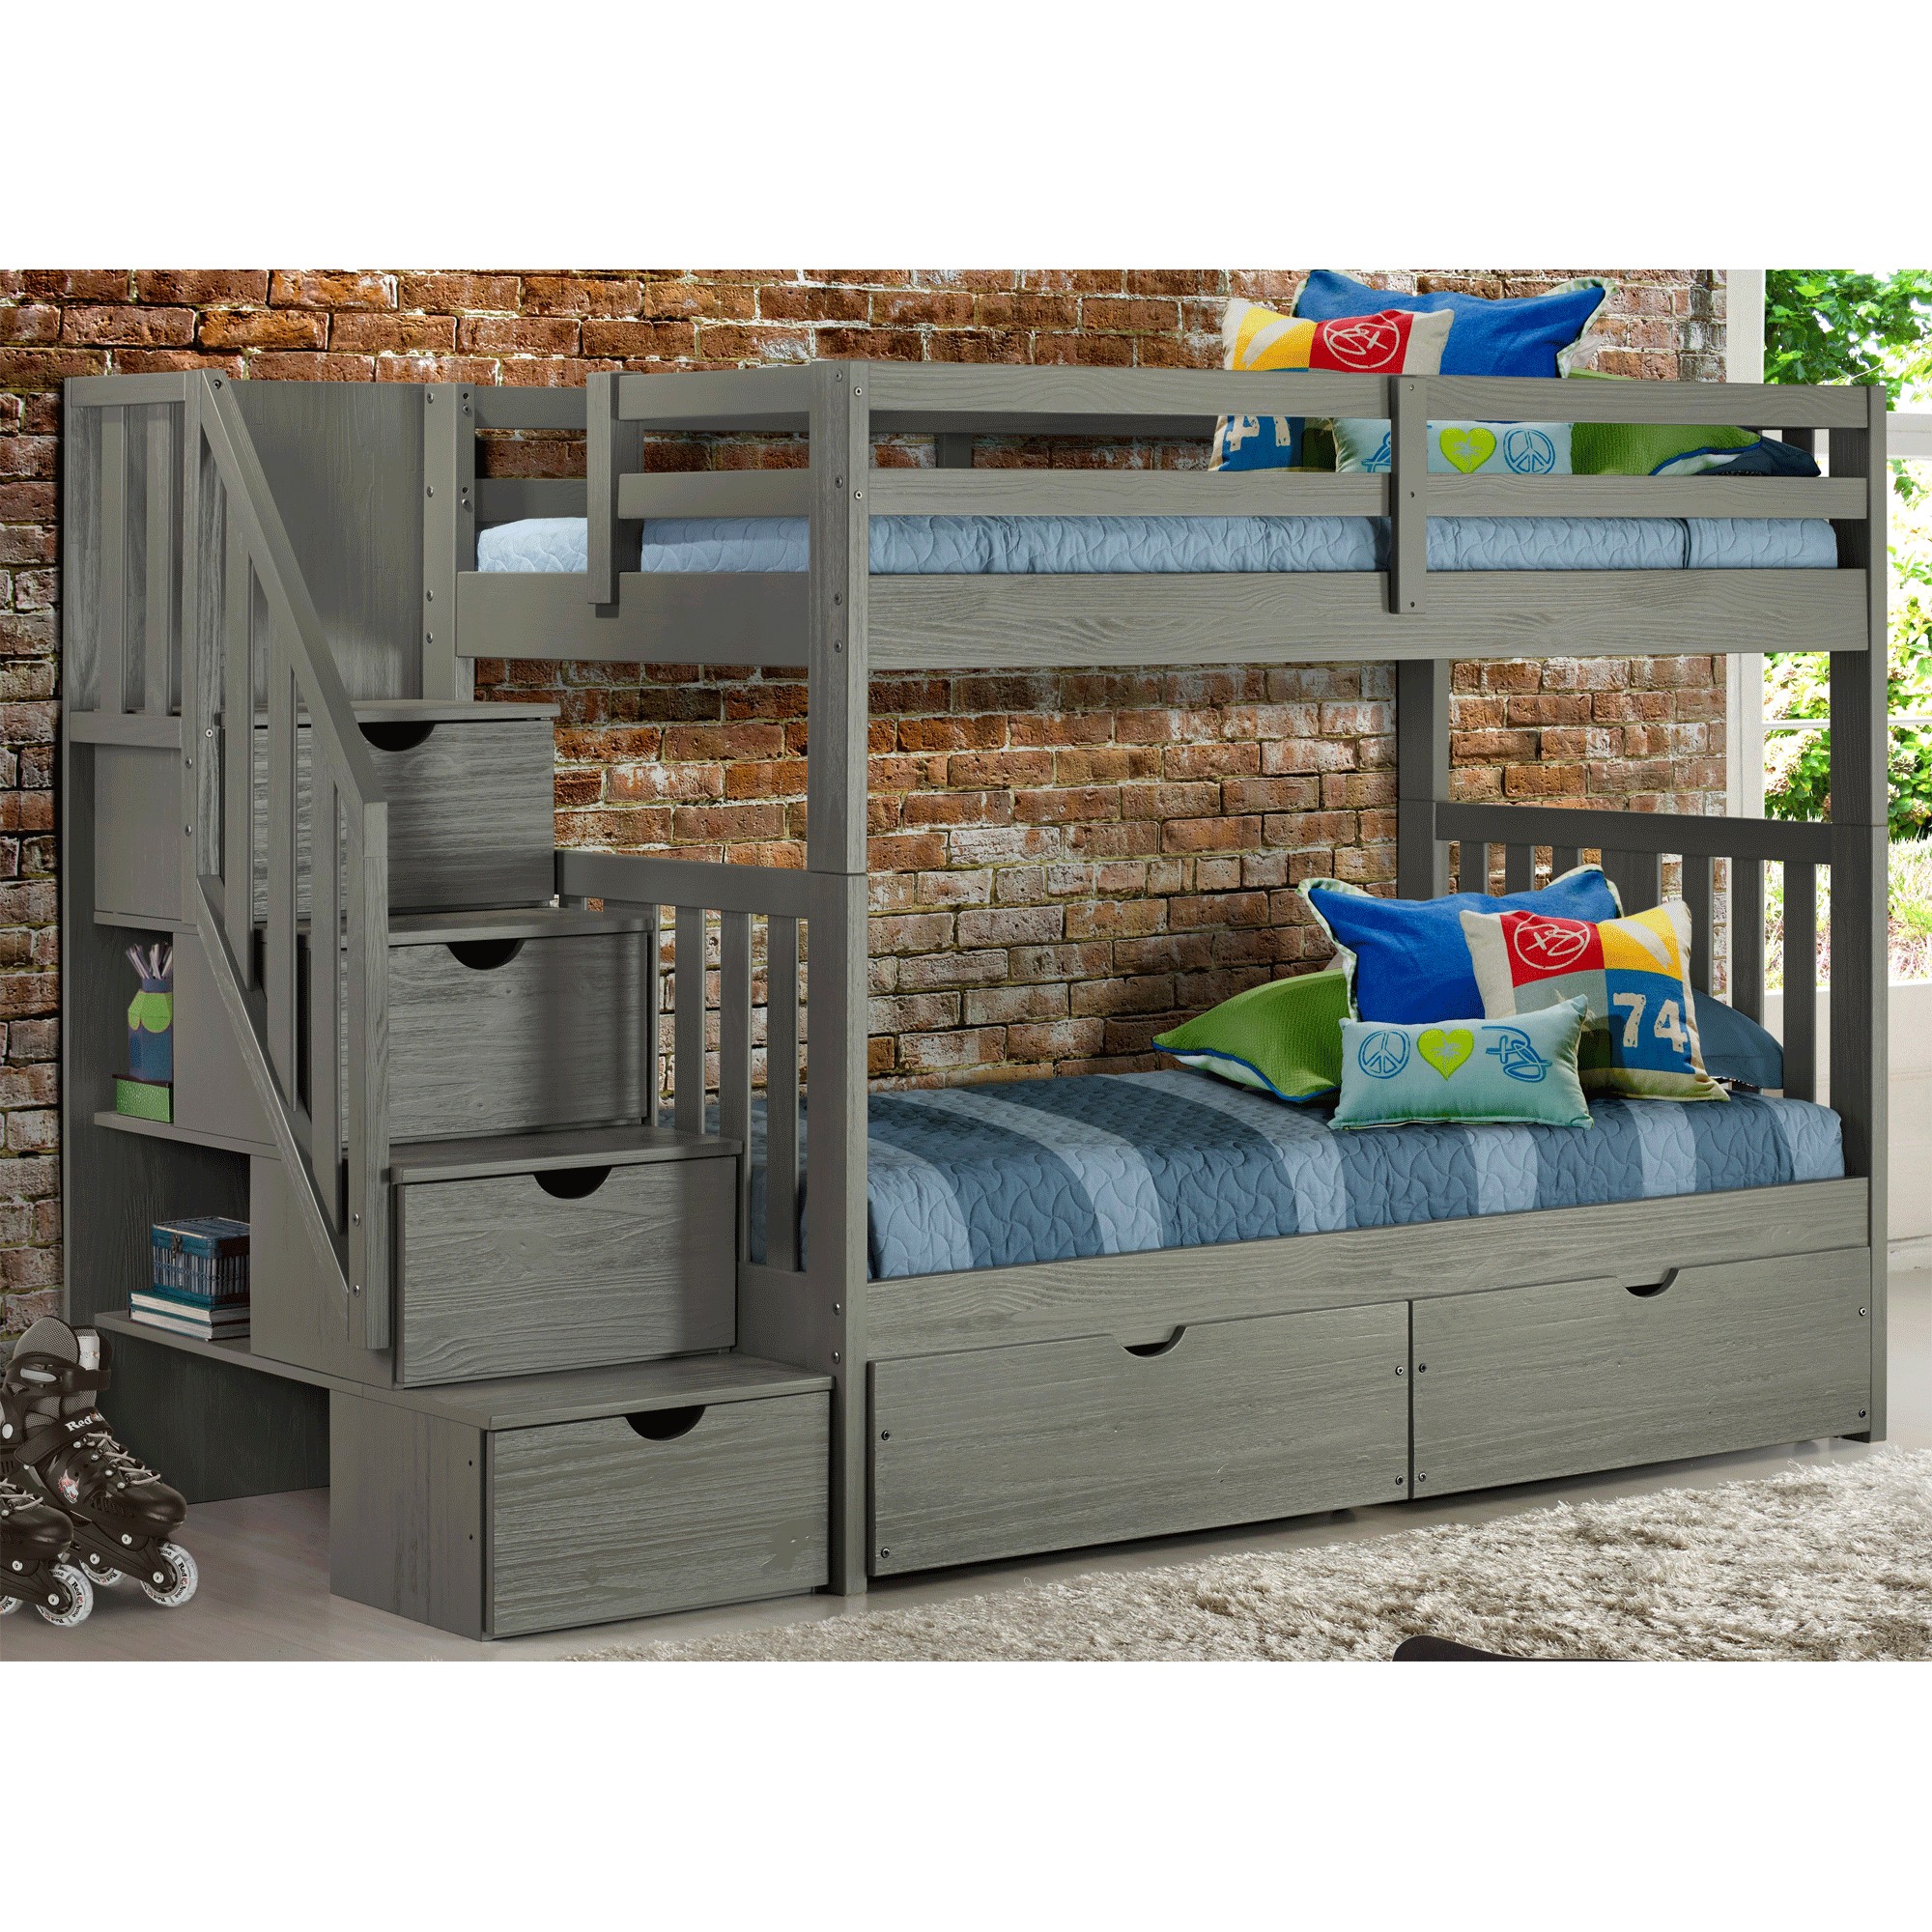 Cambridge staircase bunk bed with drawers bernie phyl